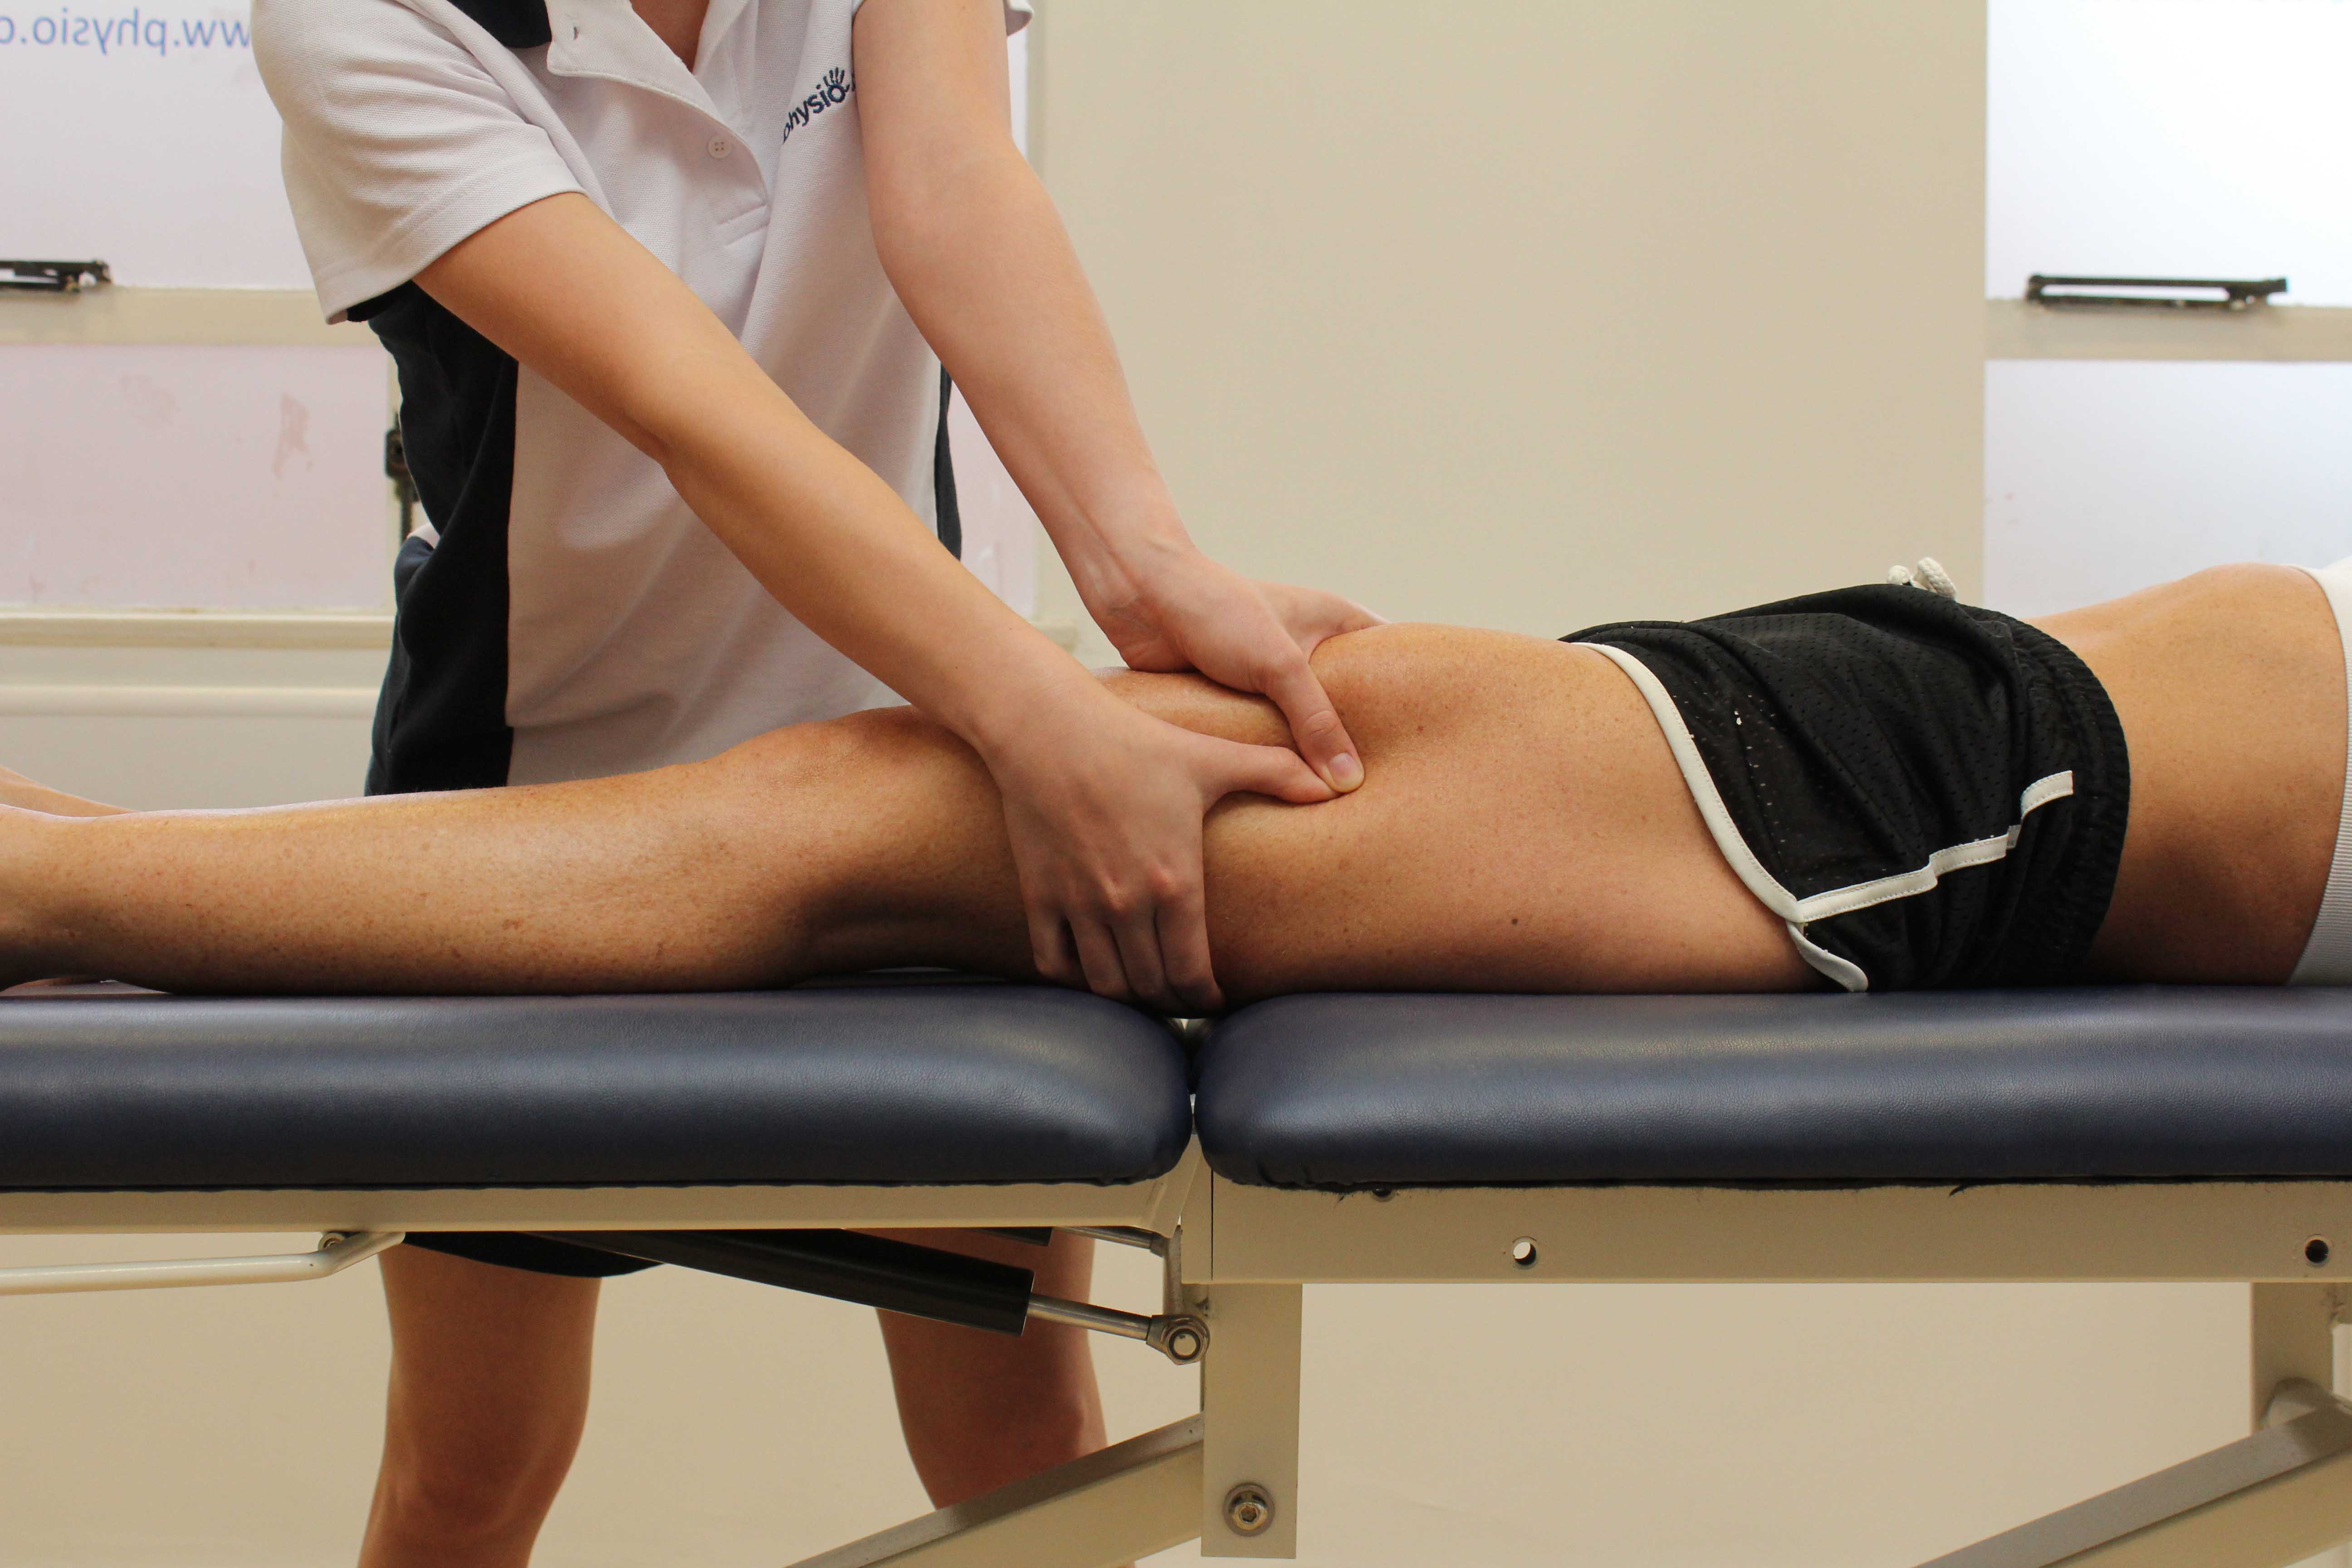 Trigger point massage applied to the illiotibial band